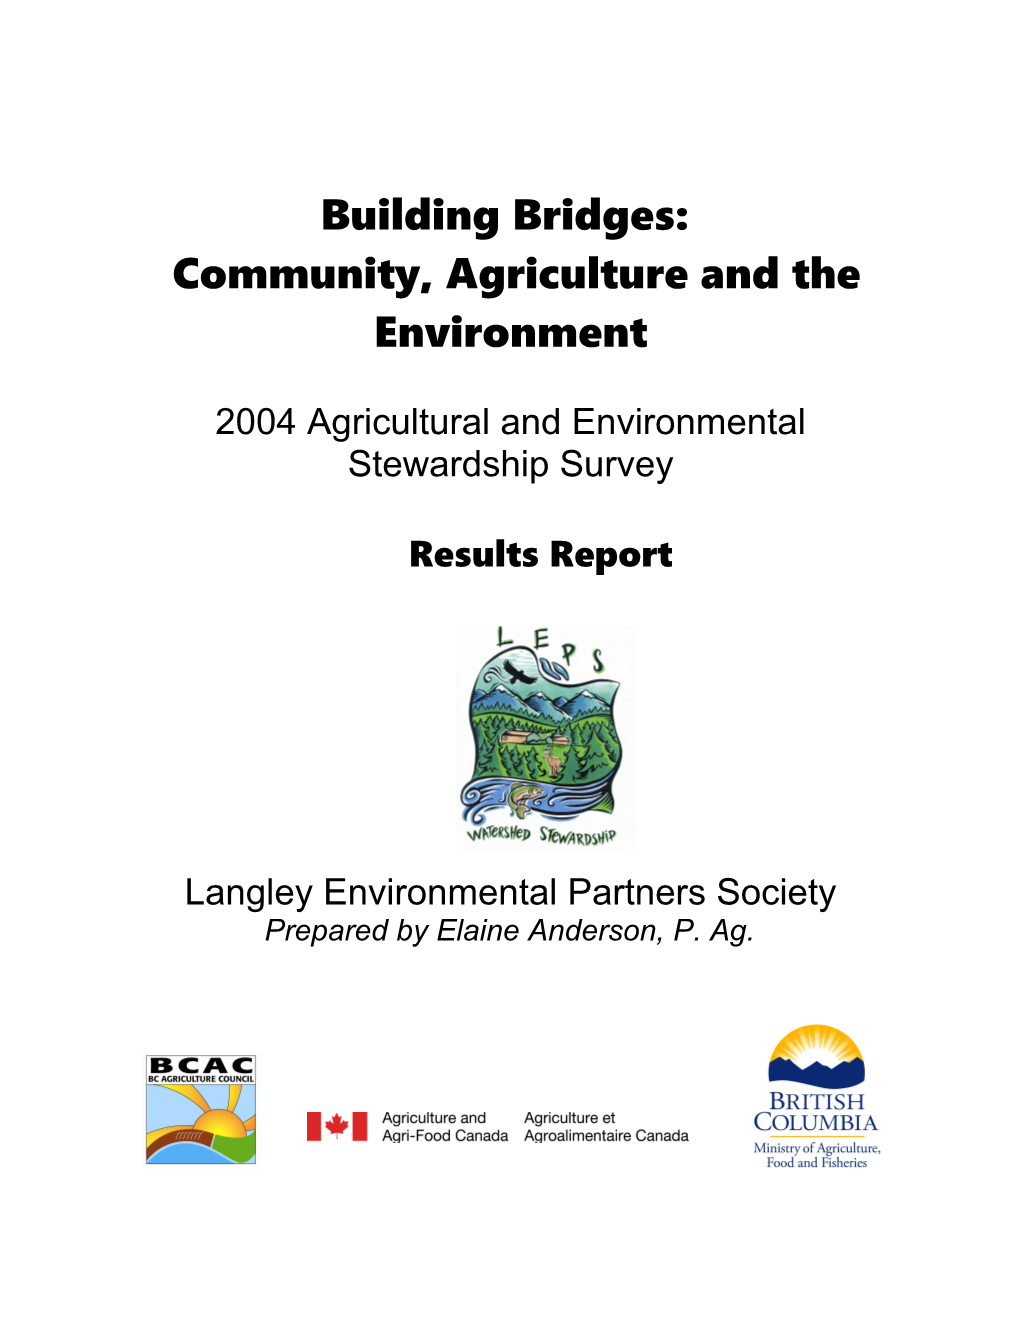 Report on the LEPS Survey Called